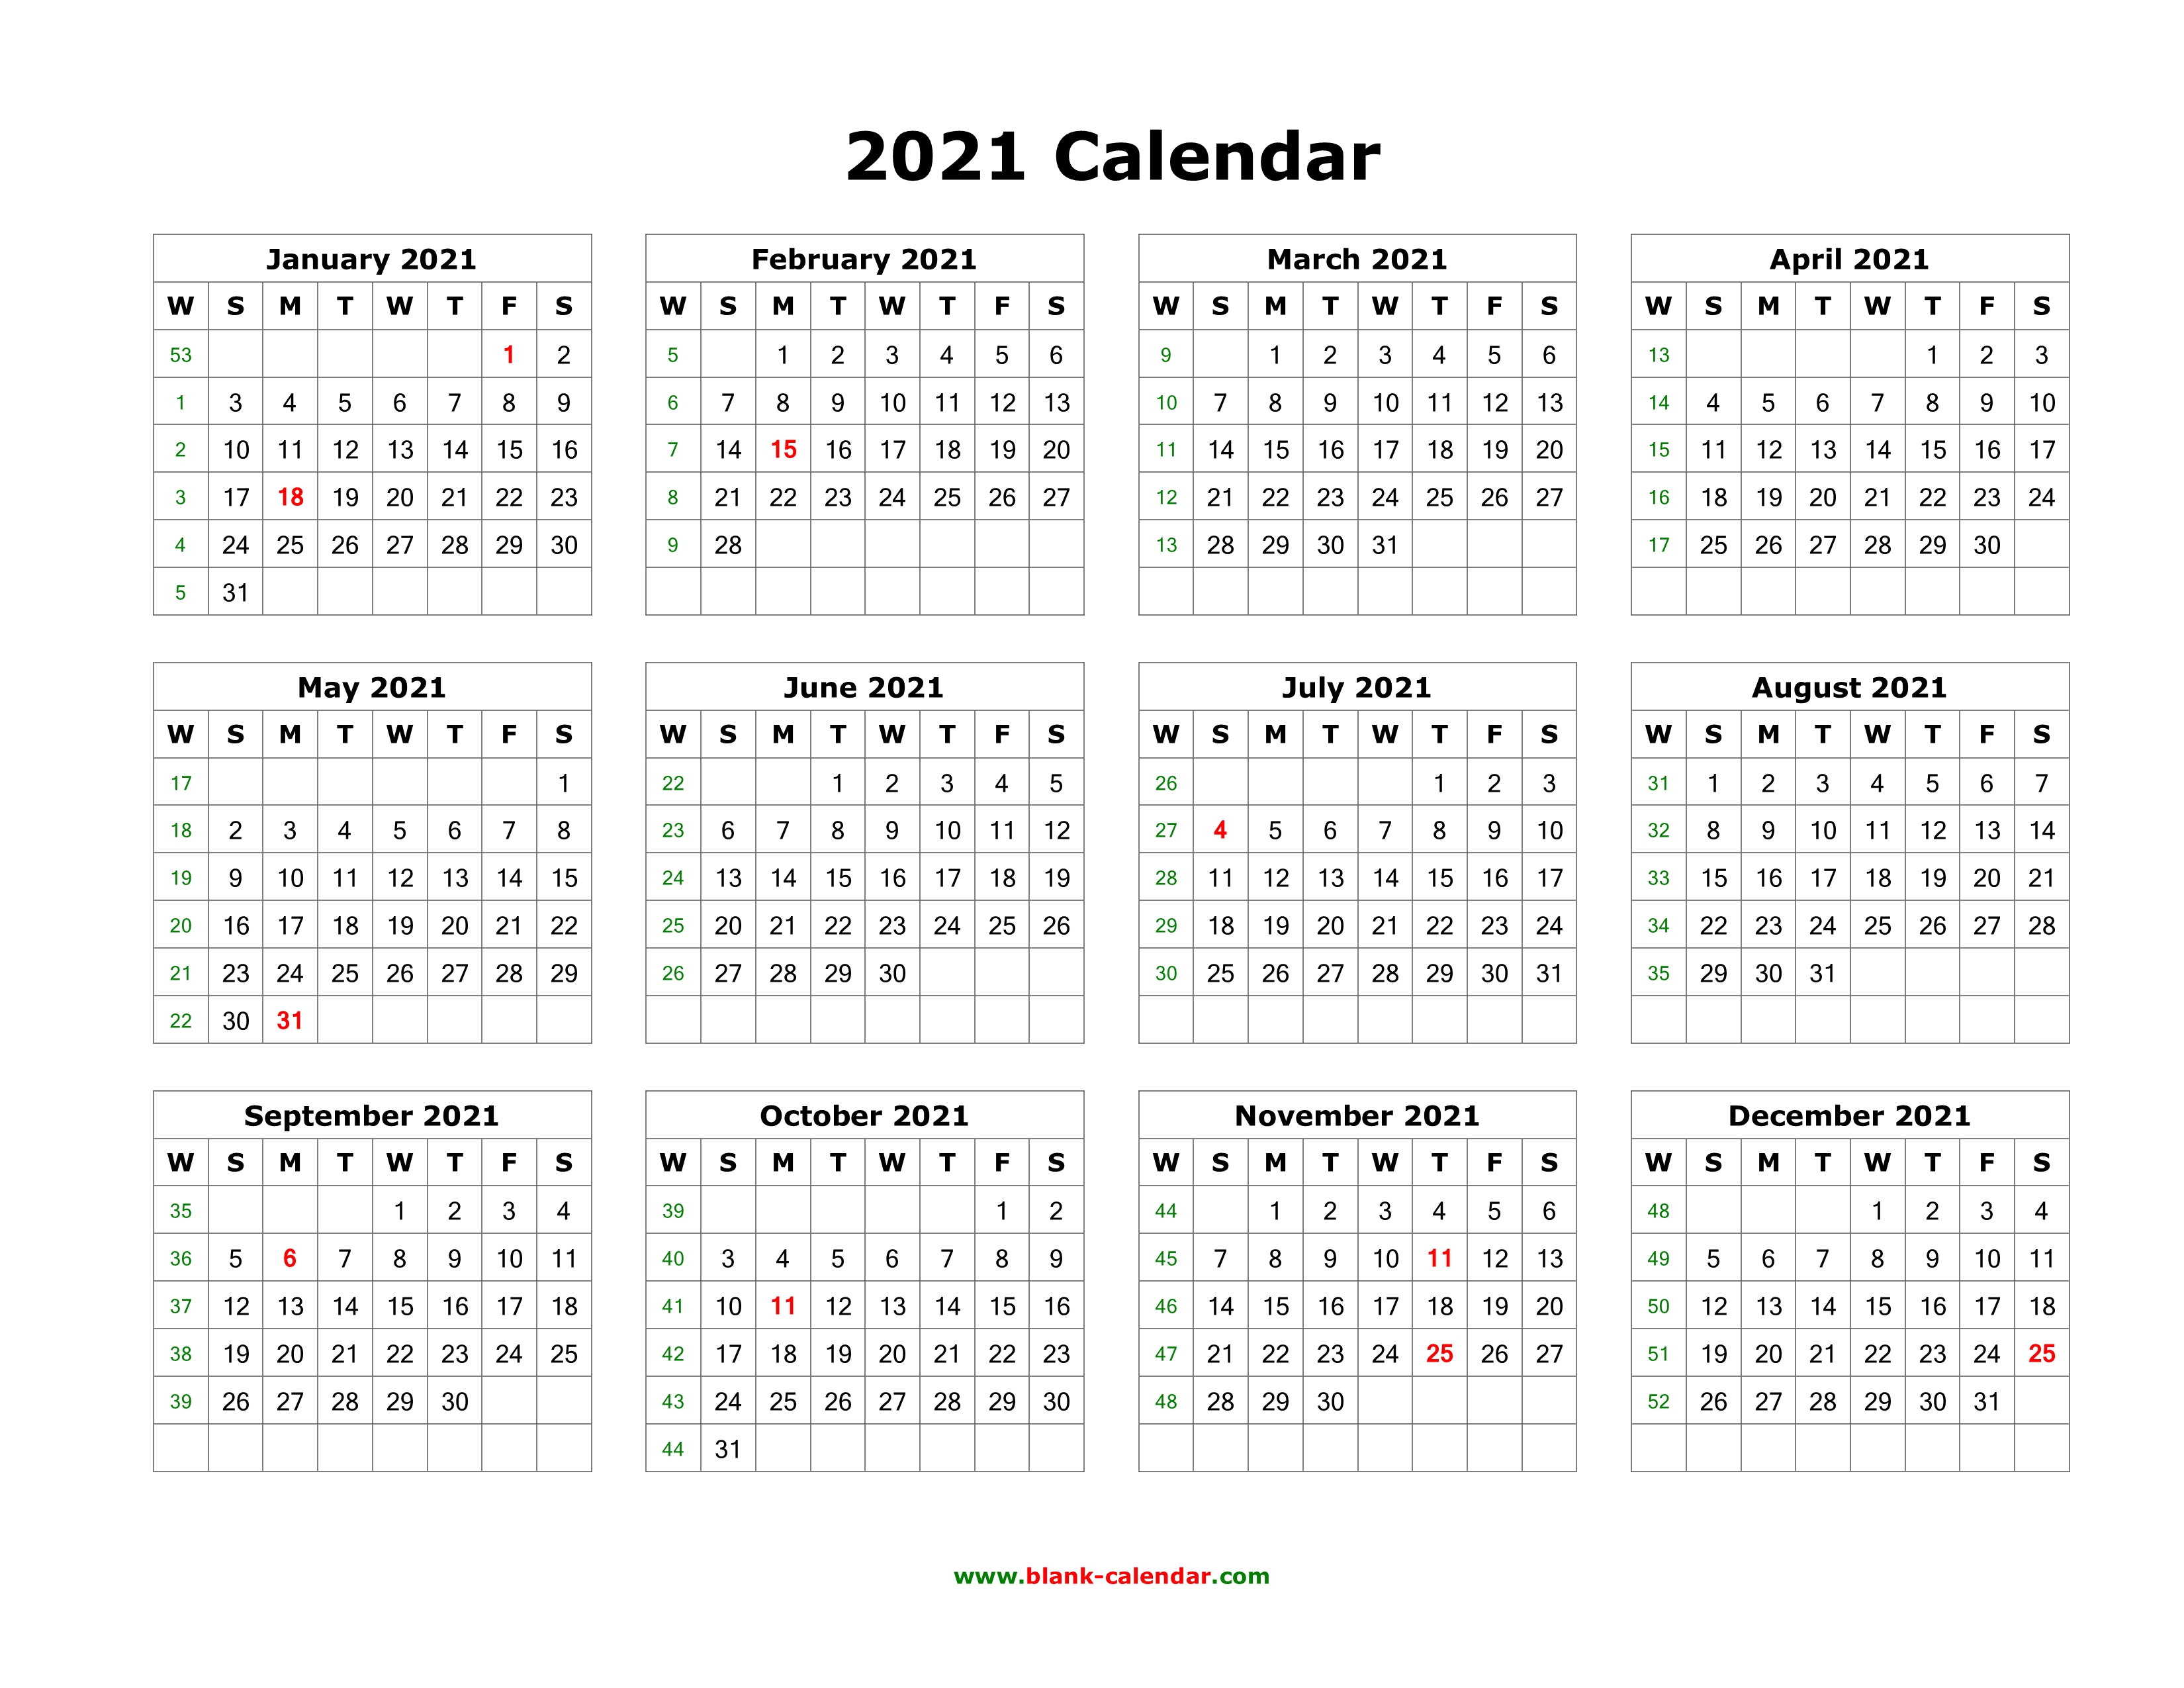 Calendar Pages 2021 Download Blank Calendar 2021 (12 months on one page, horizontal)